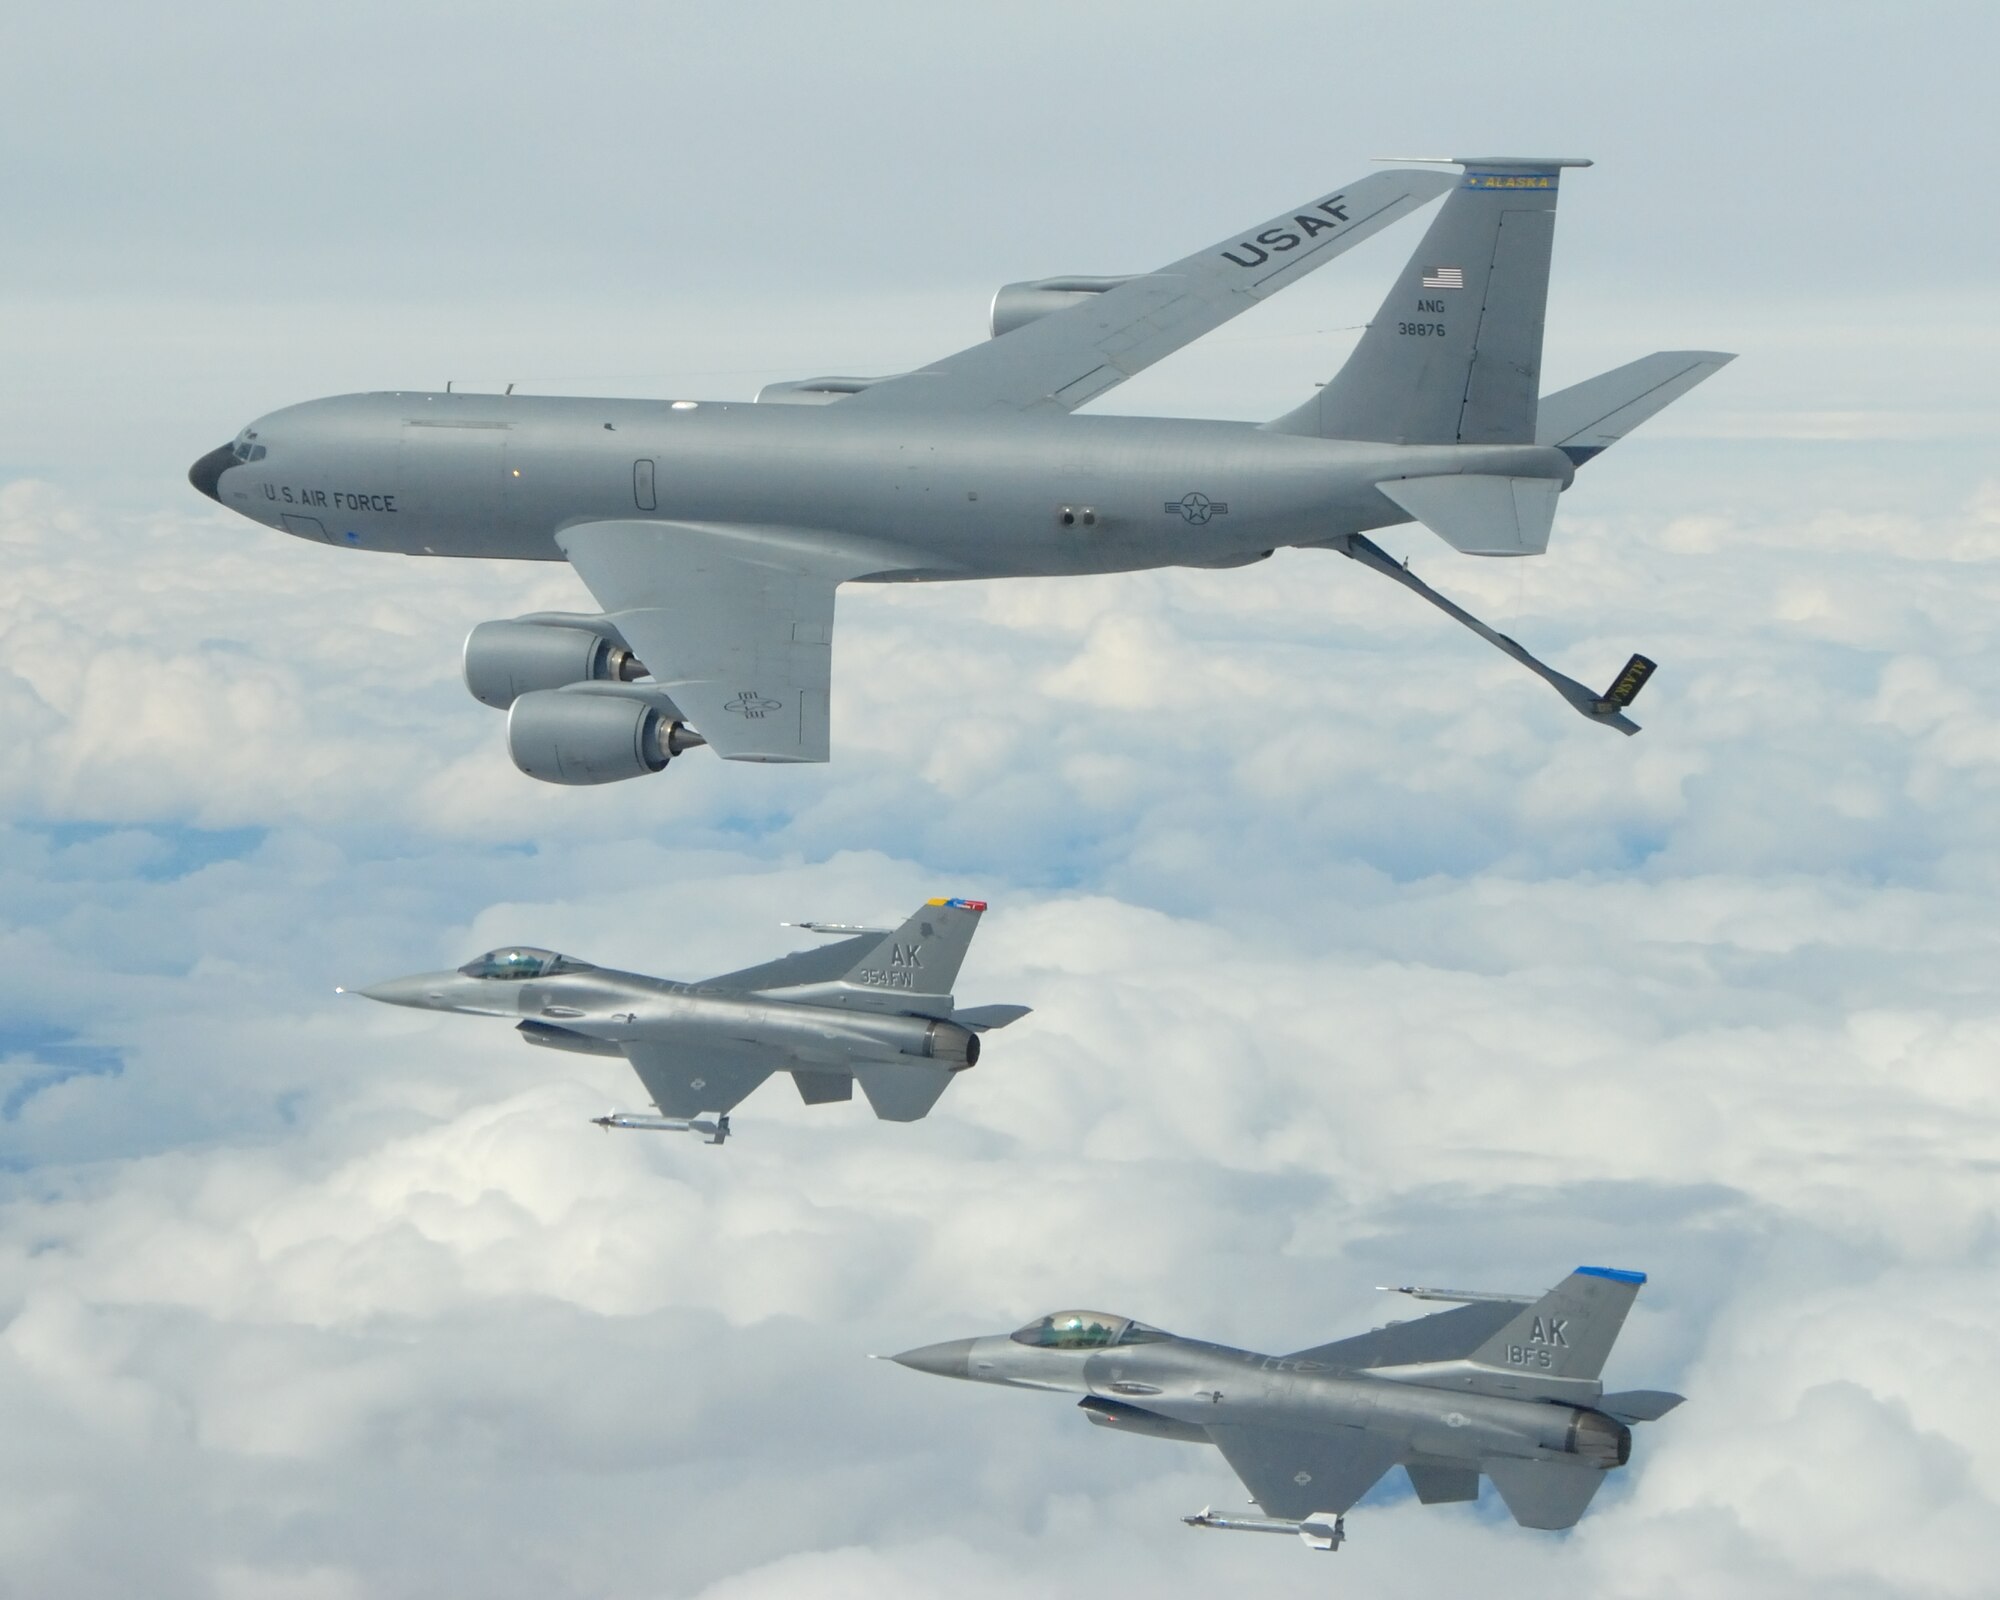 EIELSON AIR FORCE BASE, Alaska -- A KC-135R Stratotanker, 168th Air Refueling Wing, Alaska Air National Guard, refuels two F-16 Fighting Falcons from the 18th Fighter Squadron over the Pacific Alaska Range Complex on May 29, 2007.  The three aircraft assigned to Eielson flew in formation for the last time due to the deactivation of the 355th FS, and the 18th FS.  (U.S. Air Force photo by Master Sergeant Rob Wieland) 